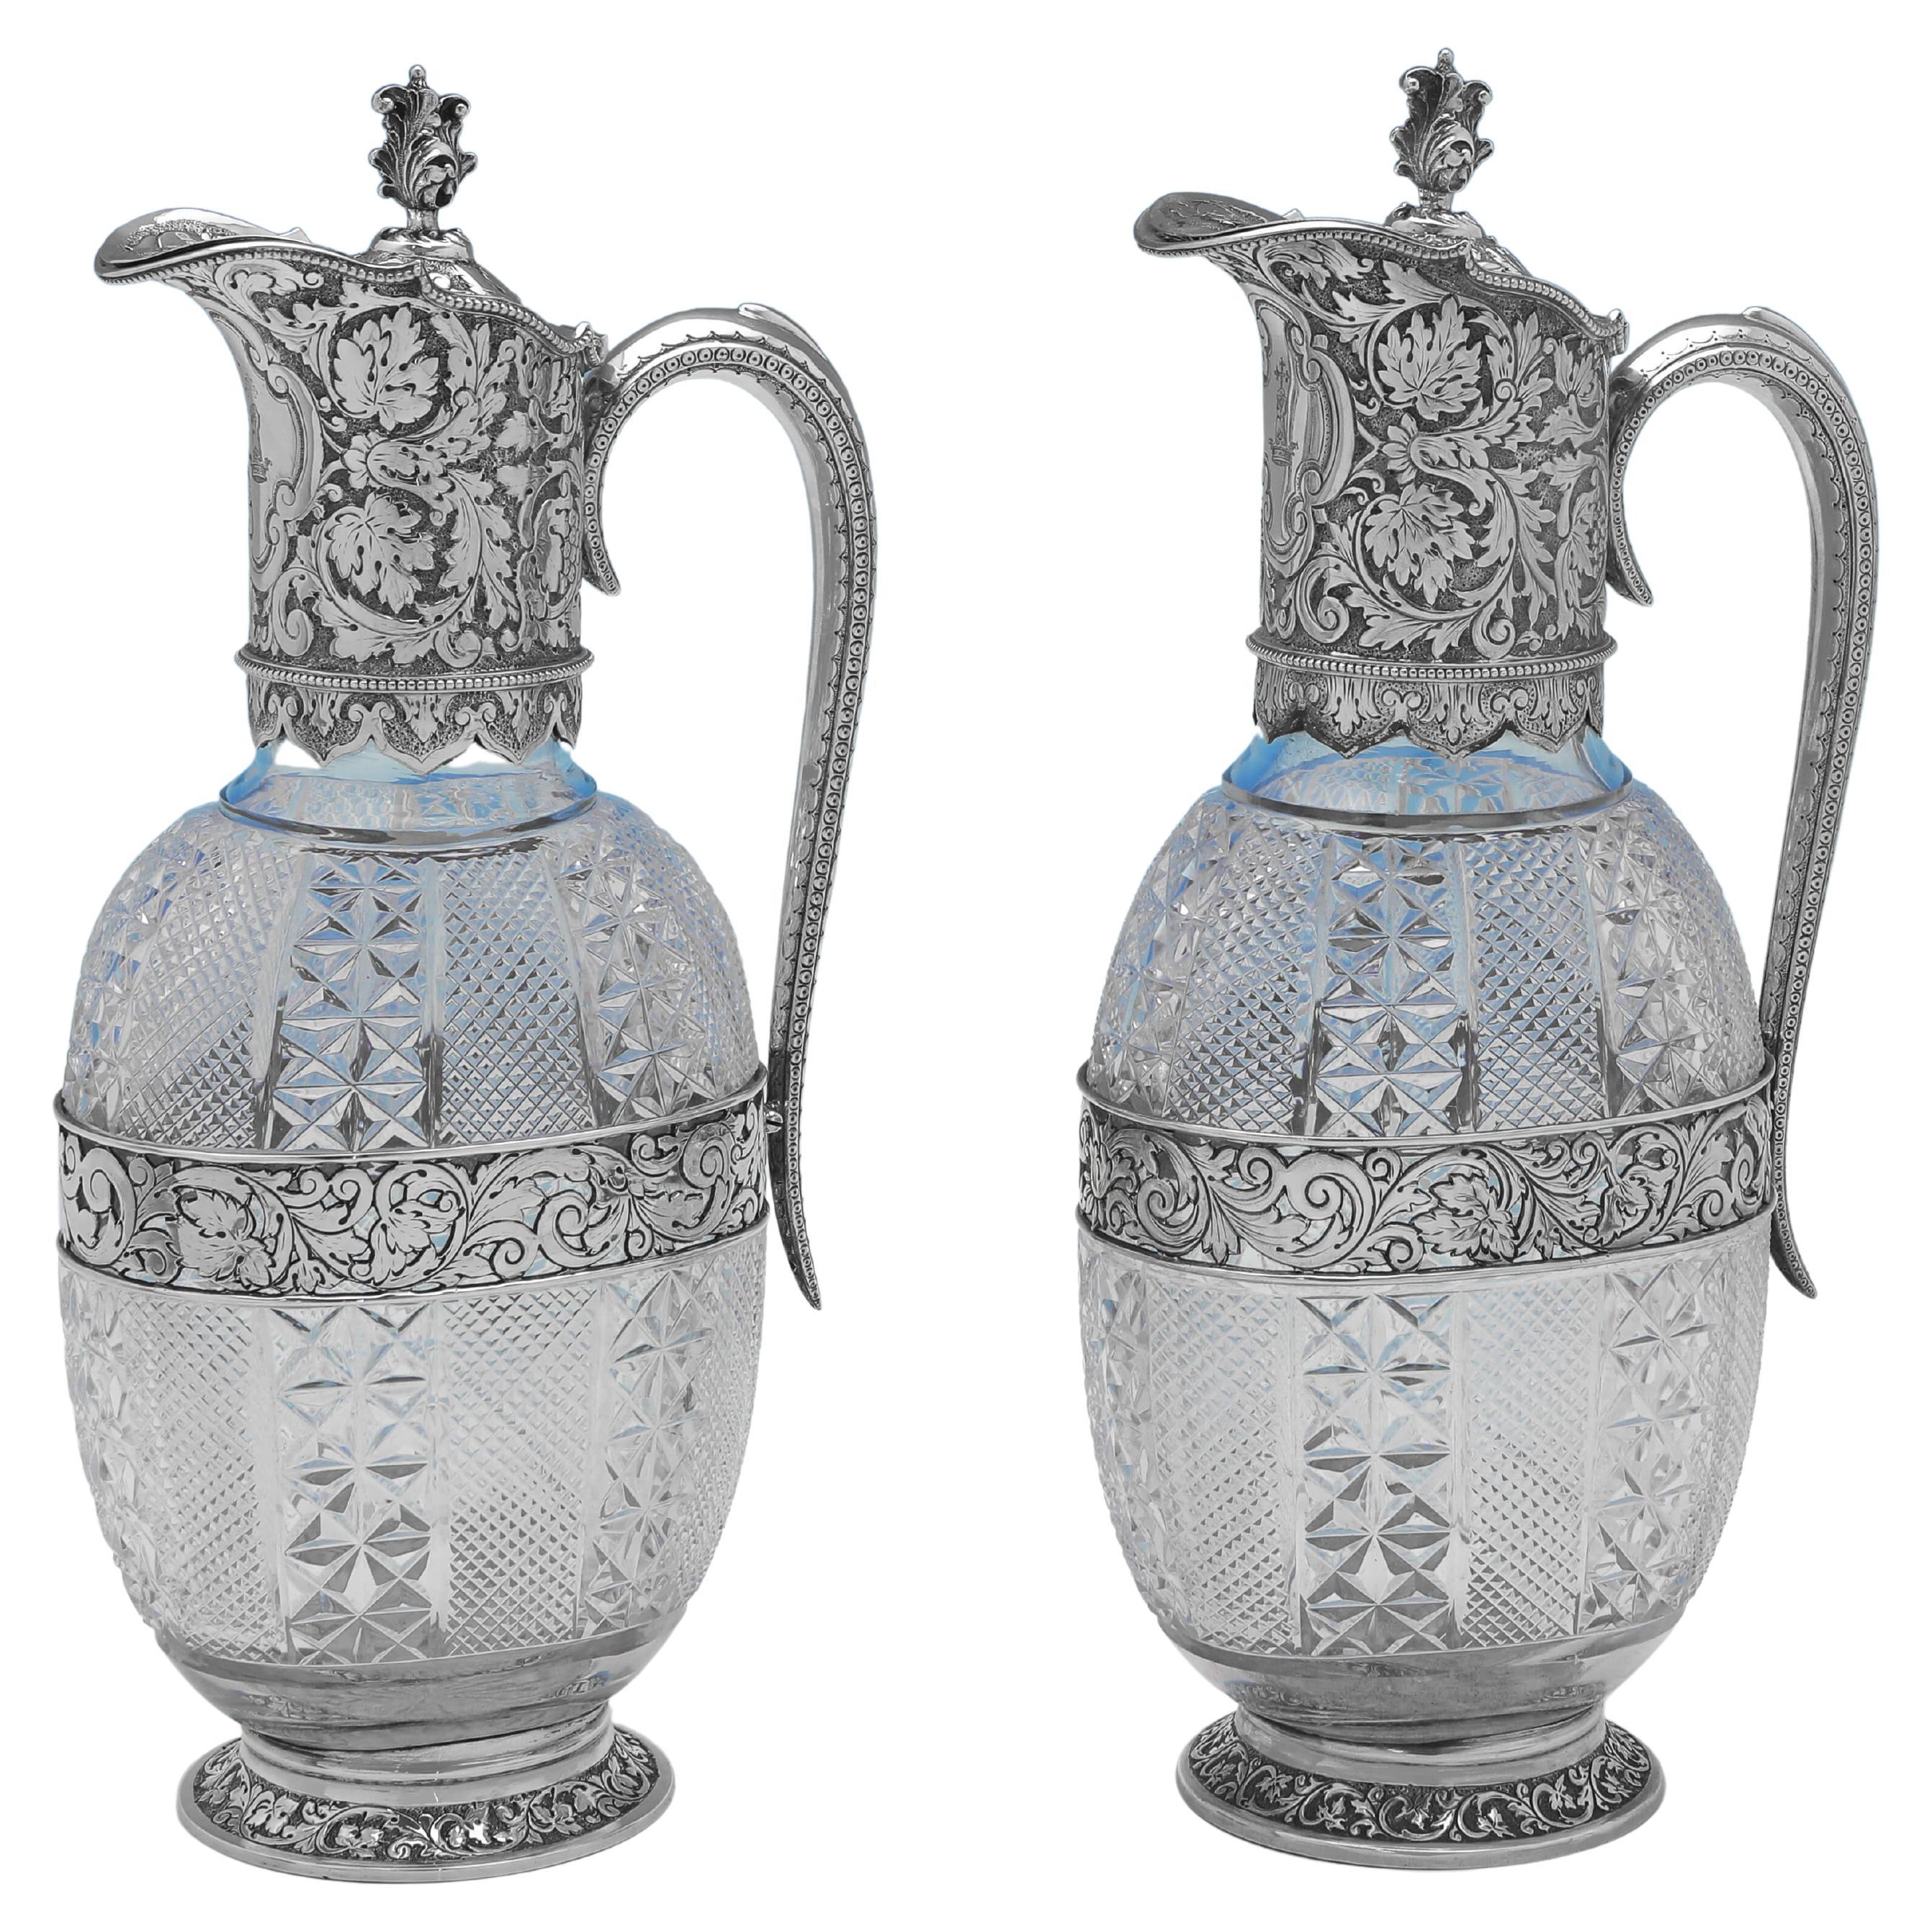 Incredible Pair of Victorian Sterling Silver Claret Jugs Made in London in 1889 For Sale